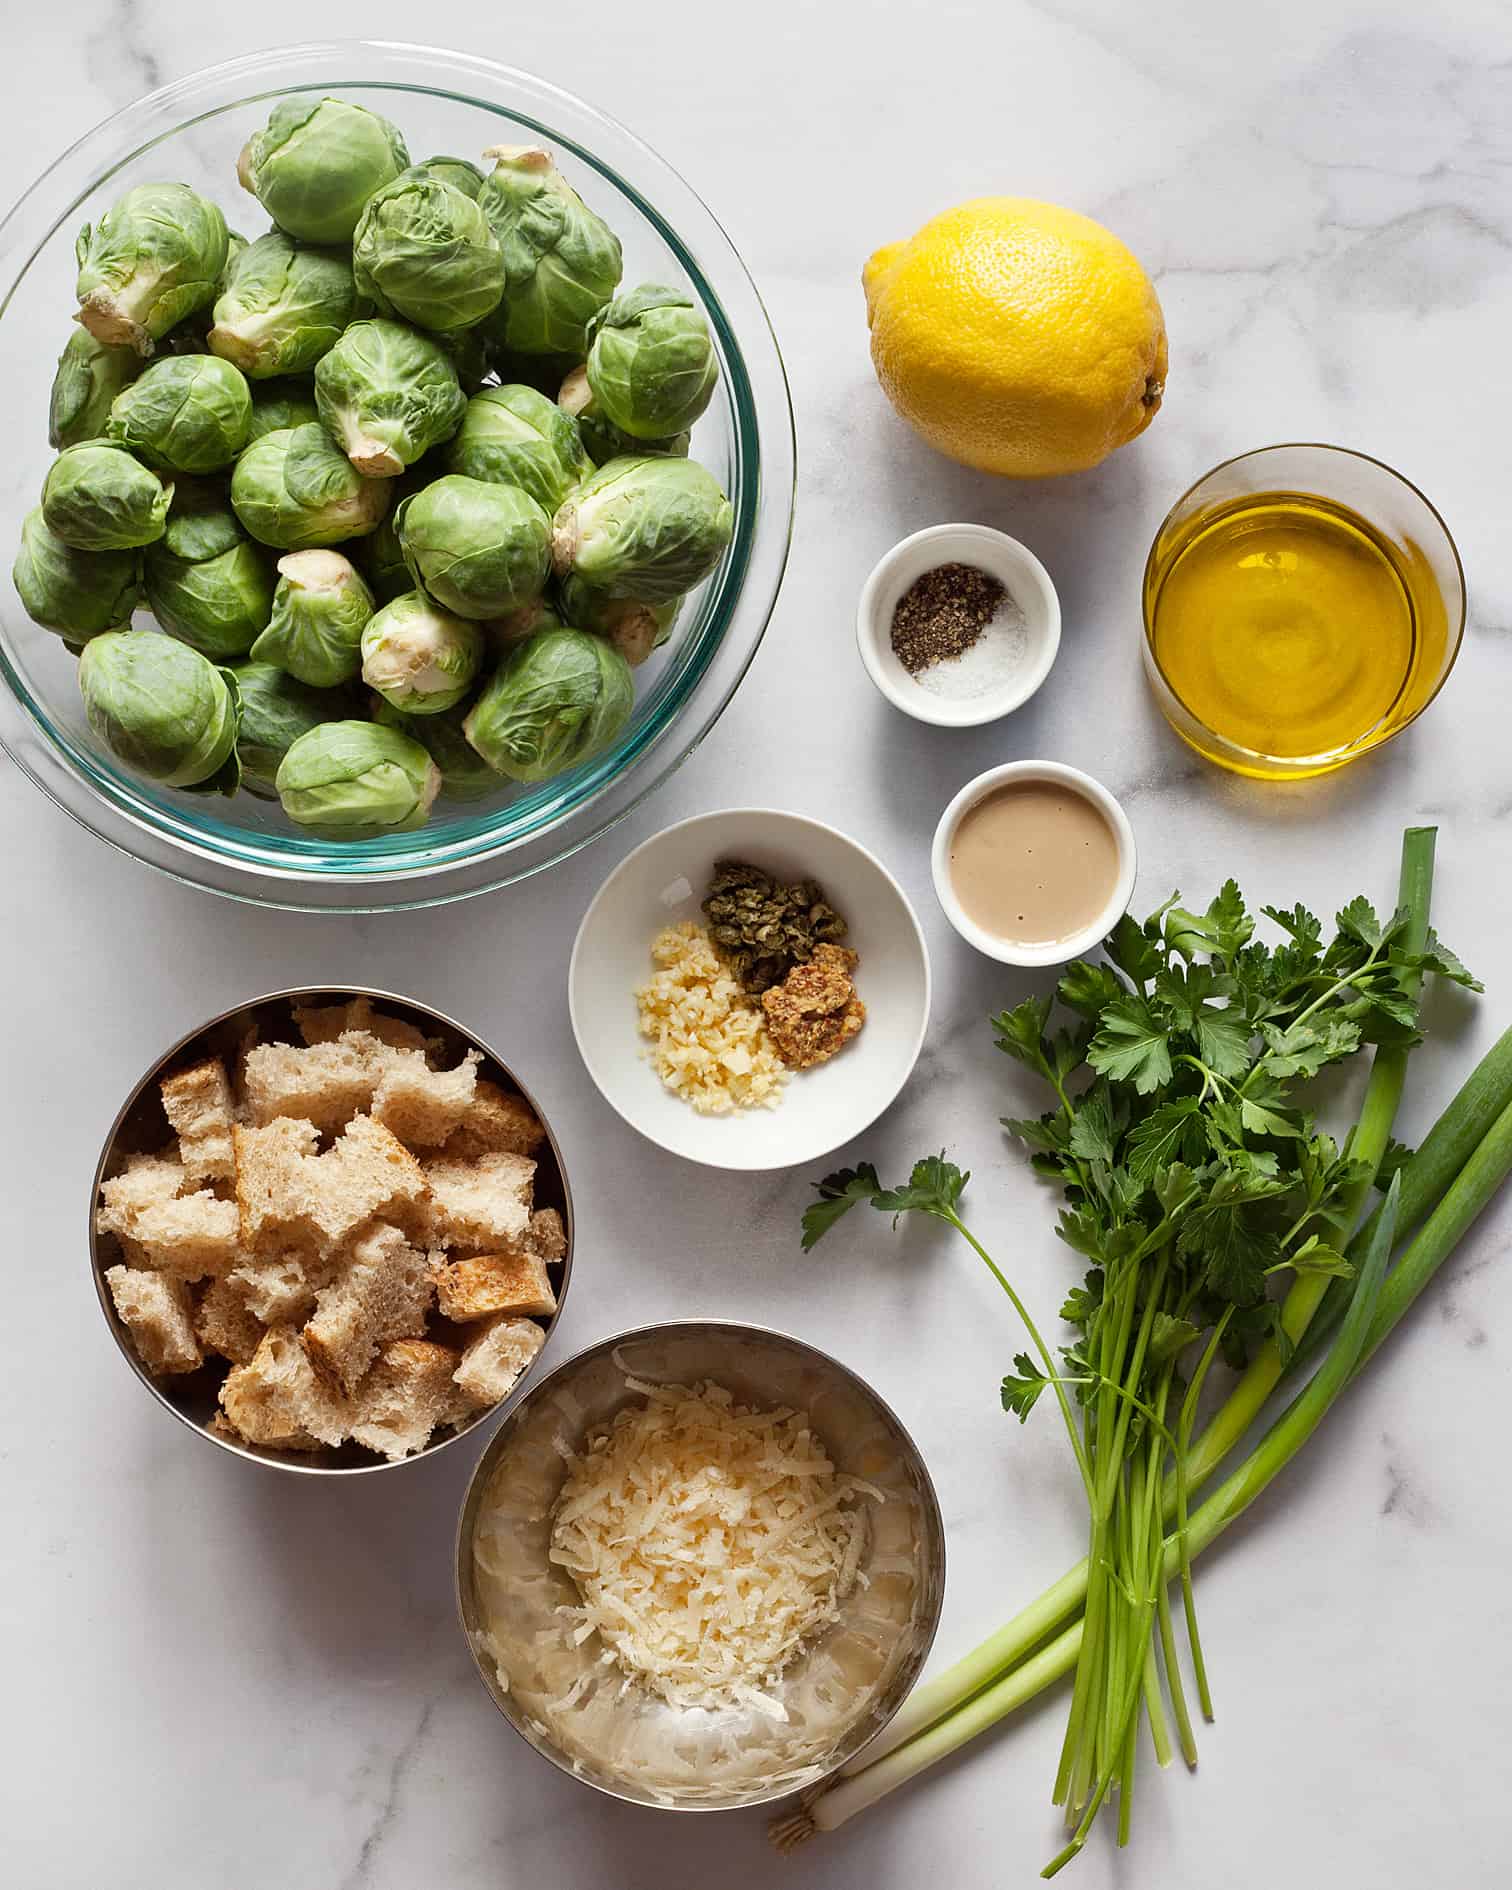 Ingredients for salad including brussels sprouts, parsley, lemon, tahini, scallions, olive oil, Parmesan and bread 